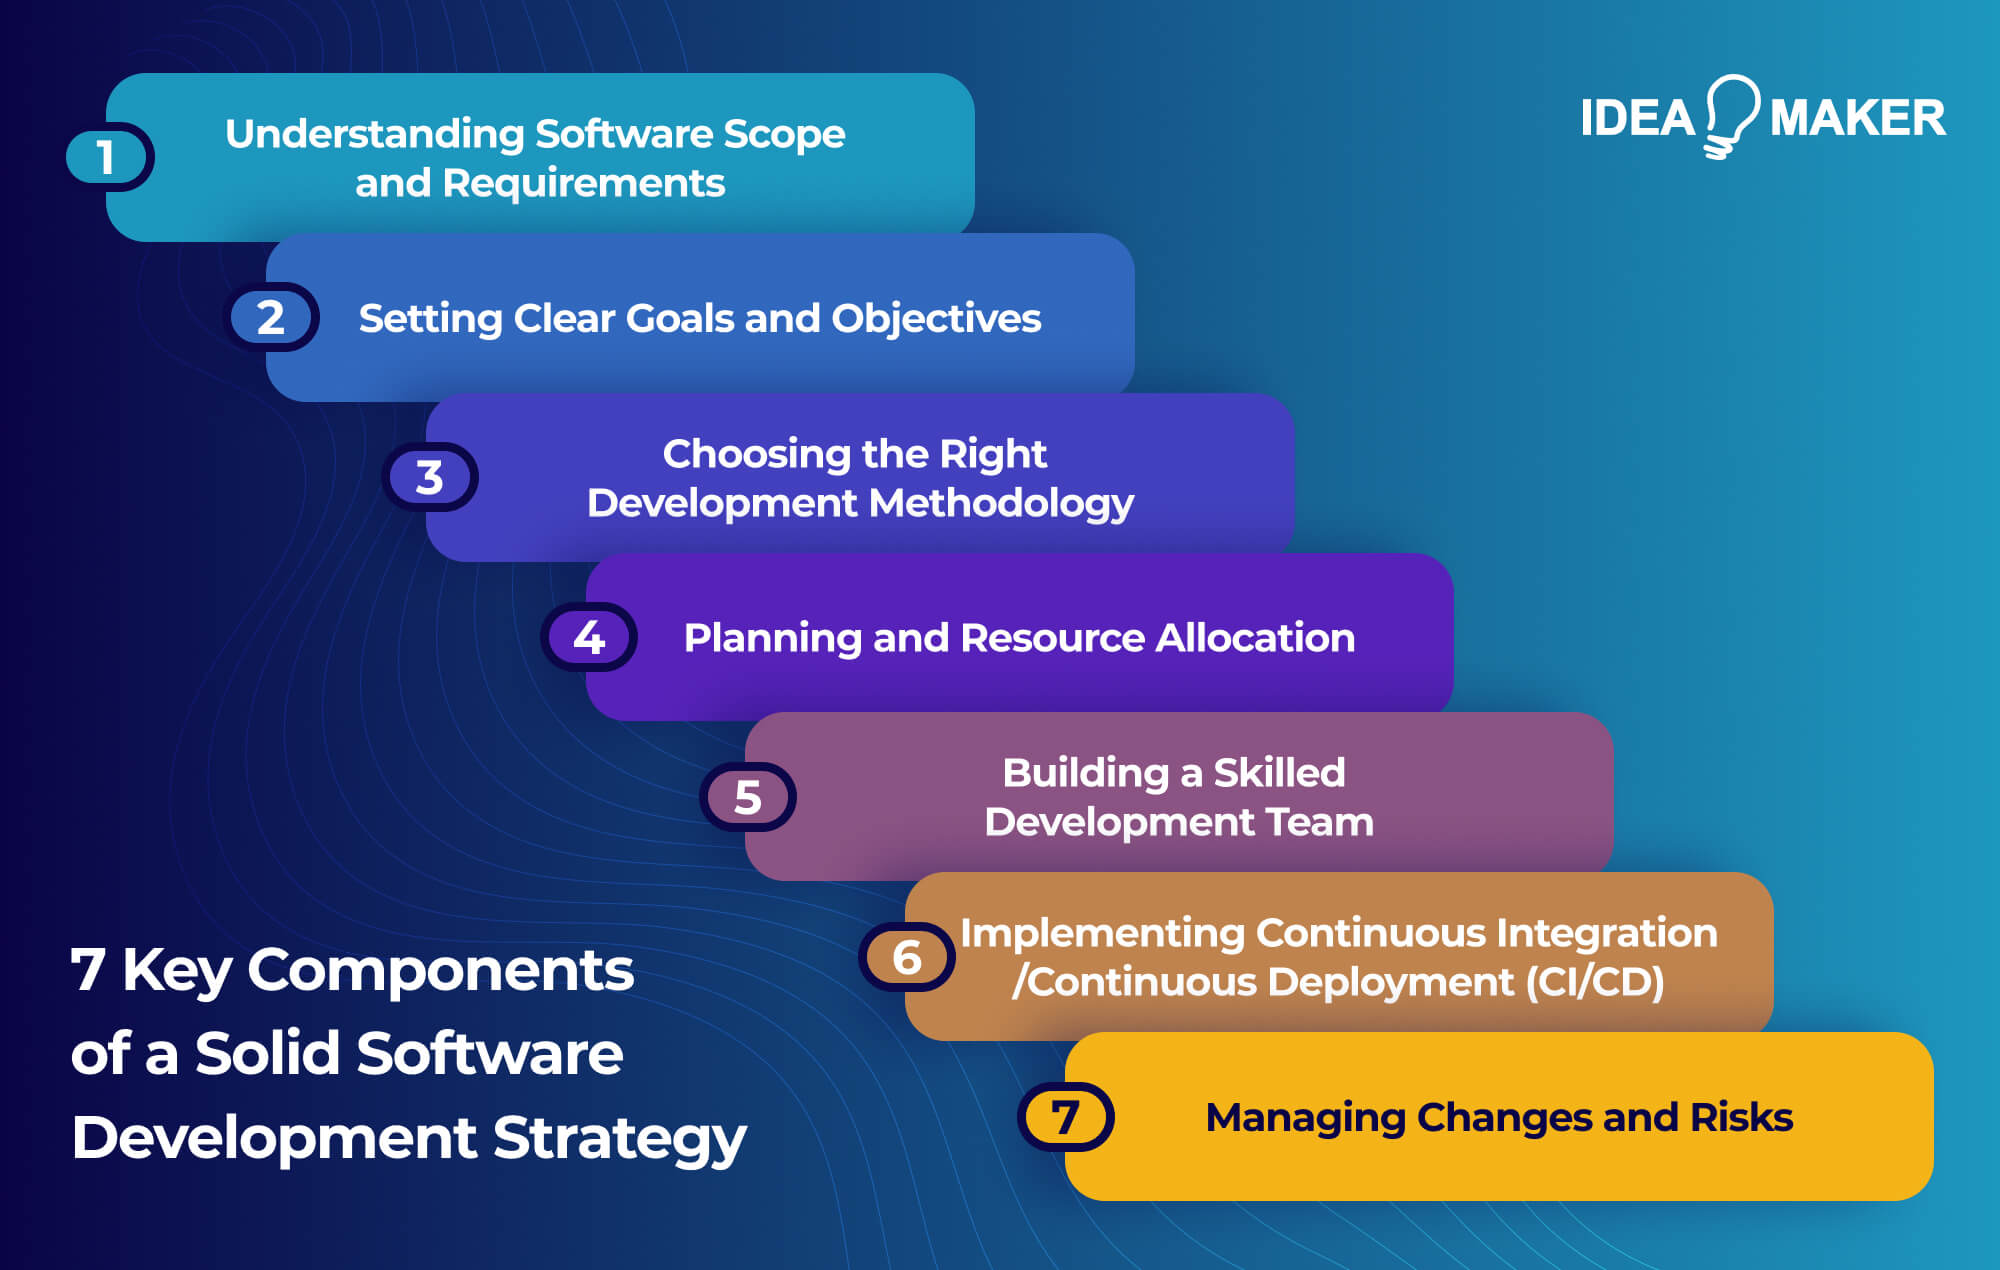 Ideamaker - 7 Key Components of a Solid Software Development Strategy